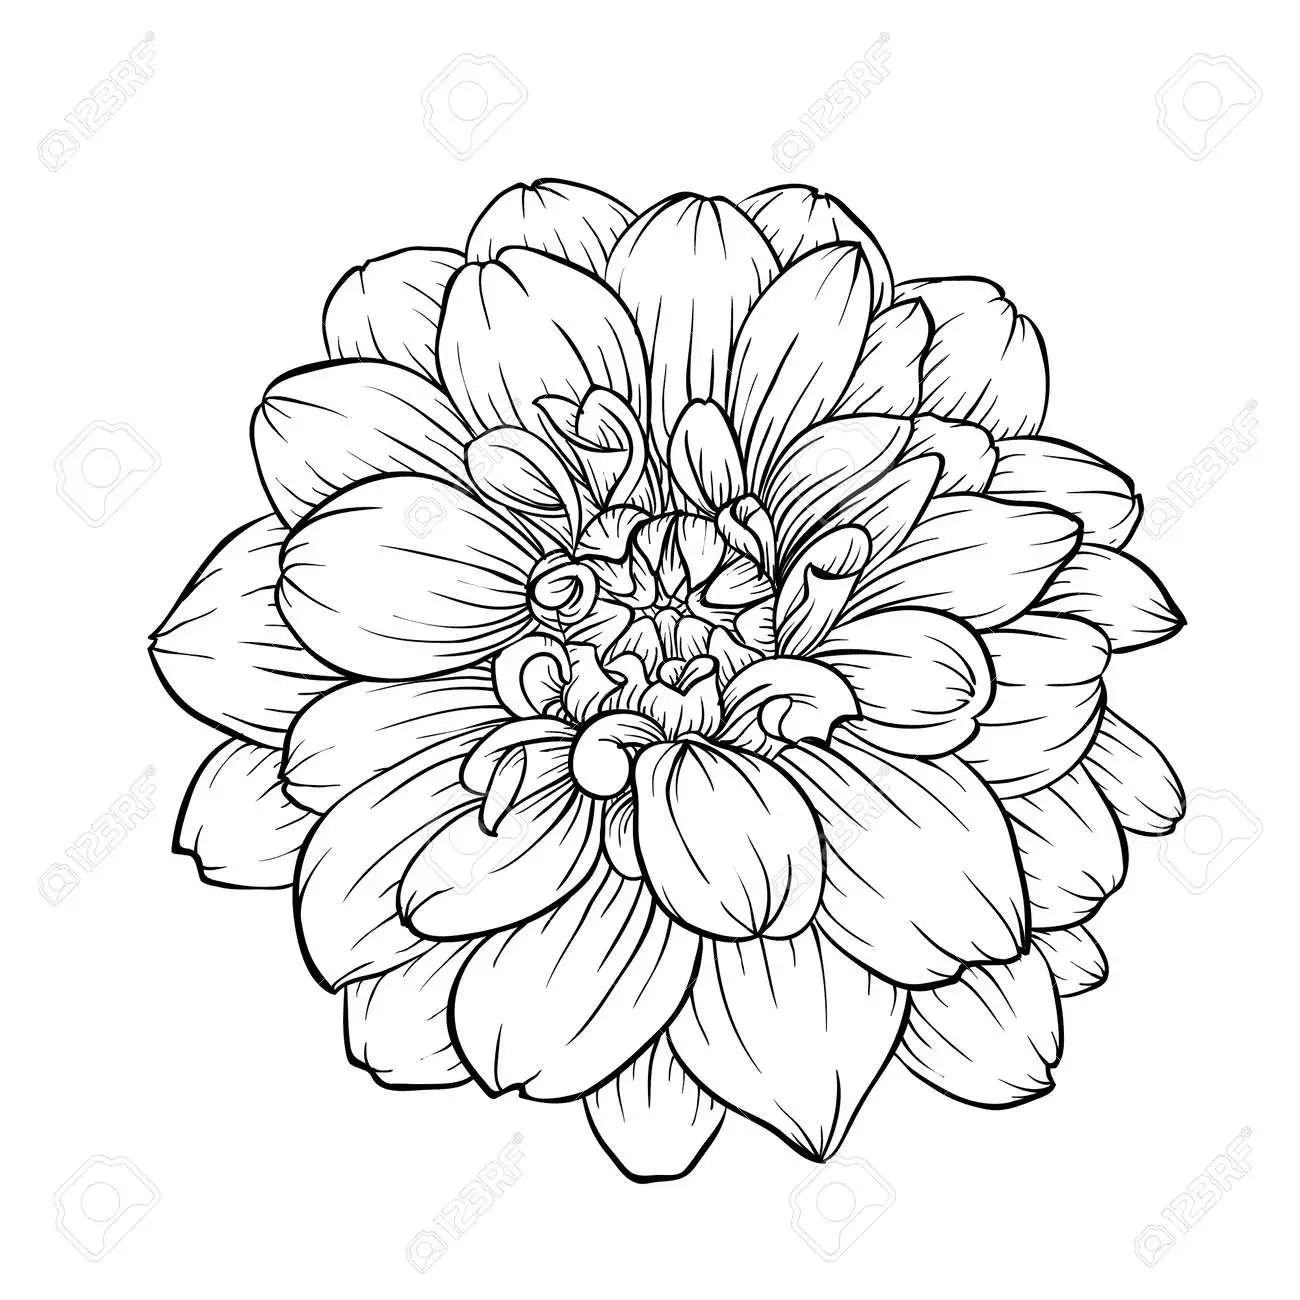 Dahlia Beauty Of Hastings to Print Coloring Page